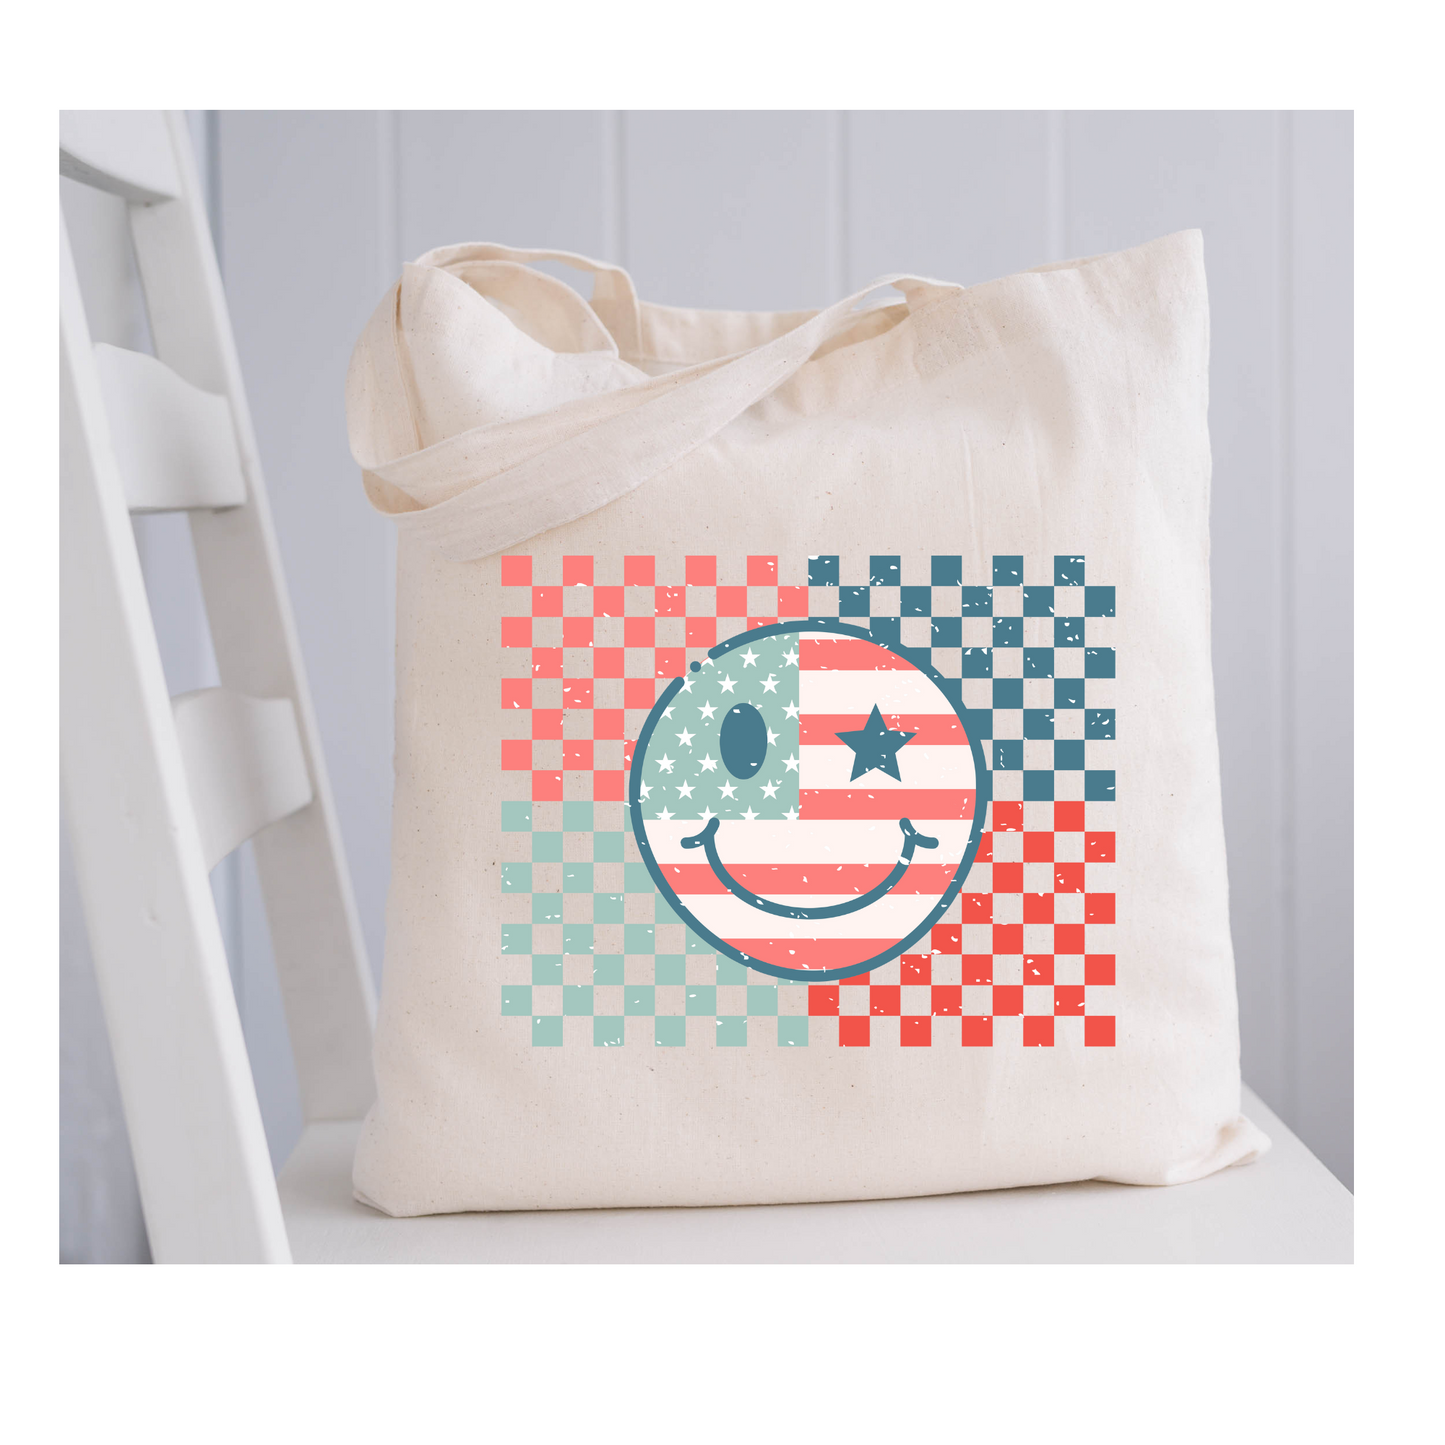 American Smiley tote